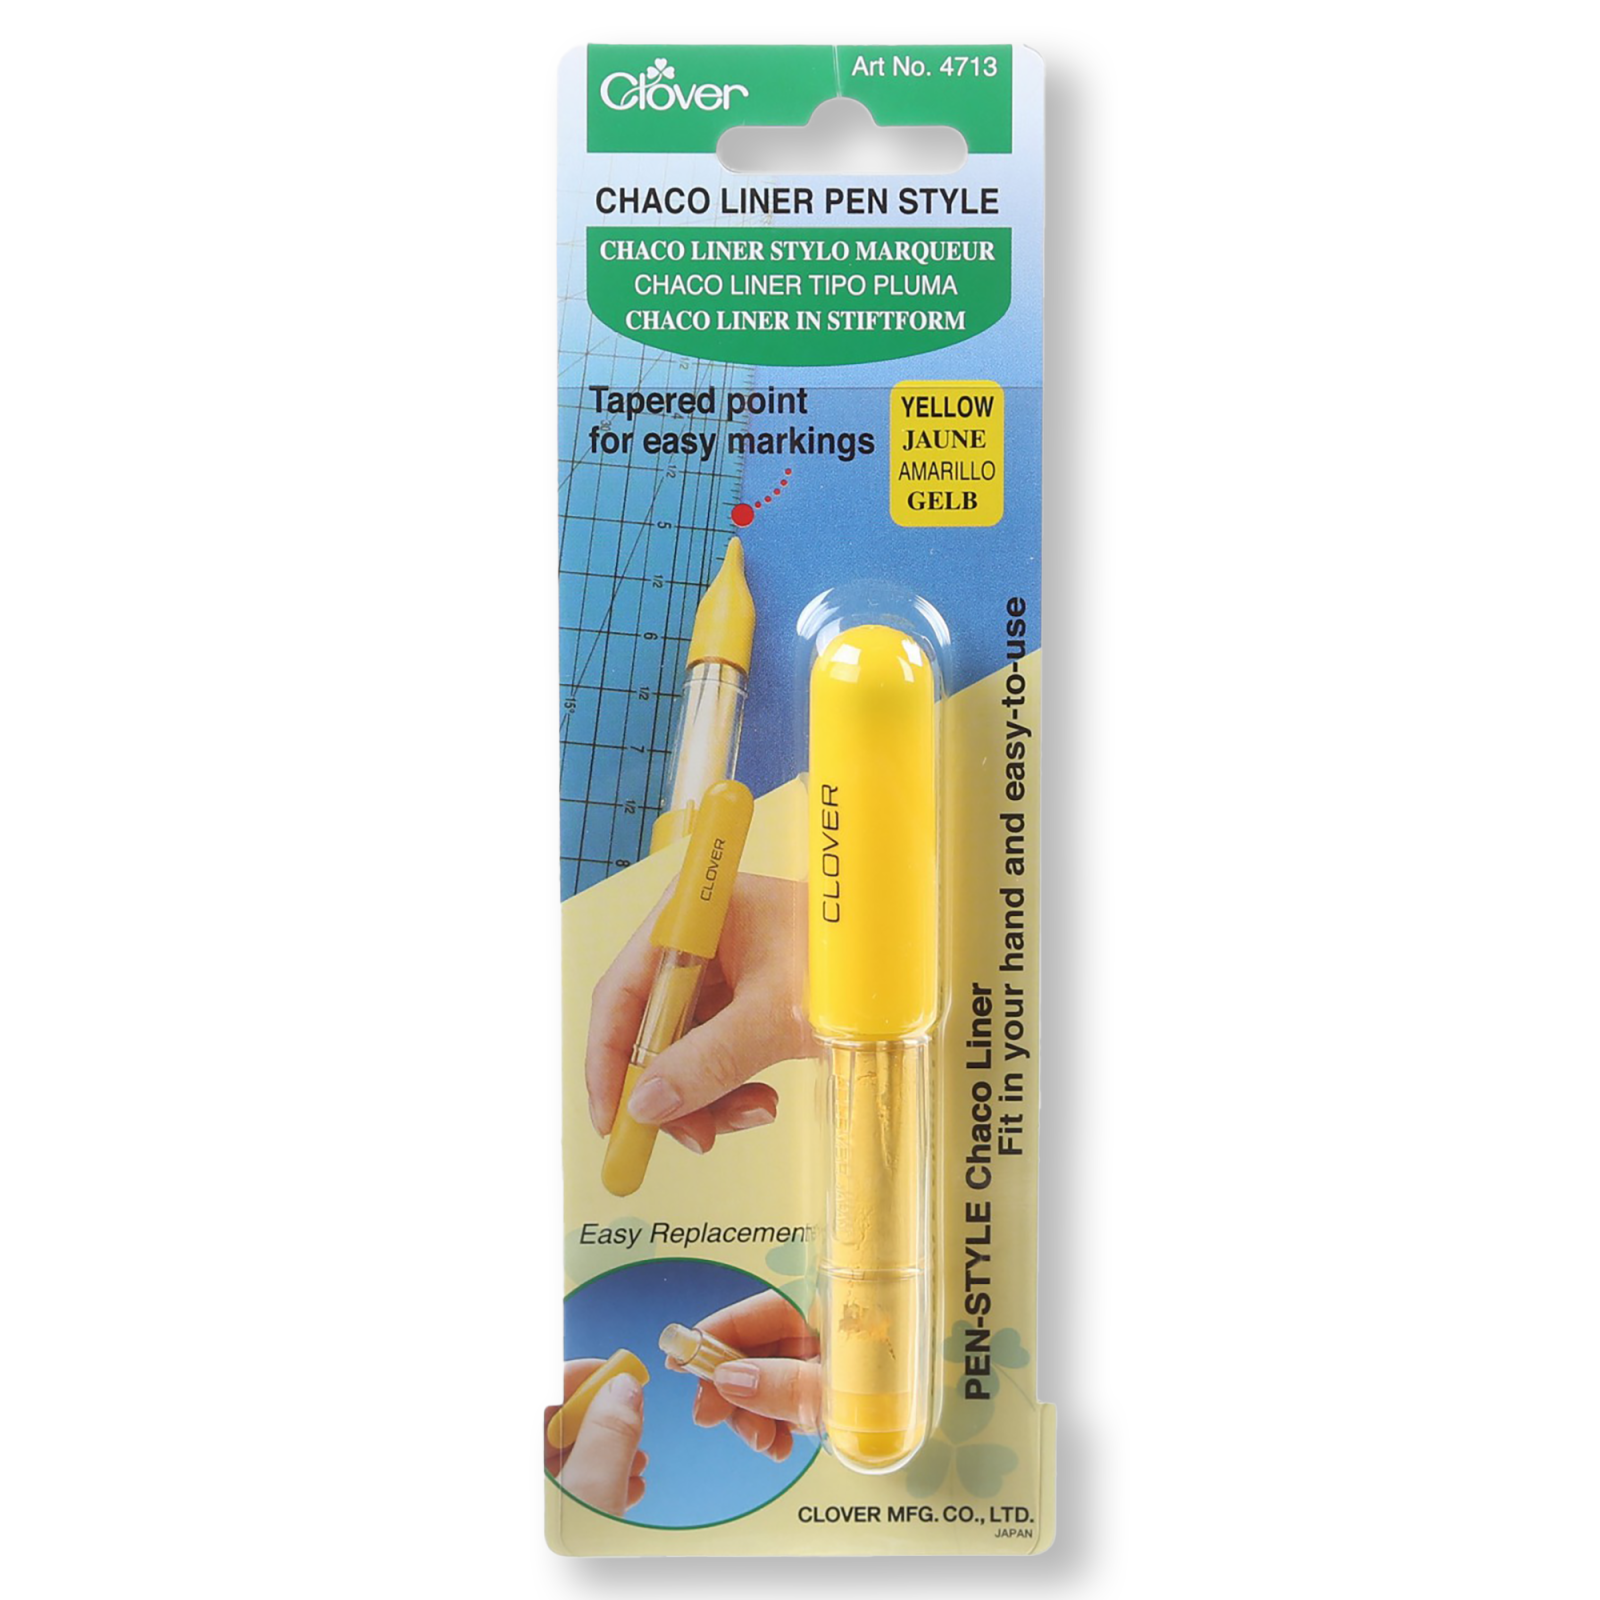 Chaco Liner Pen Style - Yellow - by Clover